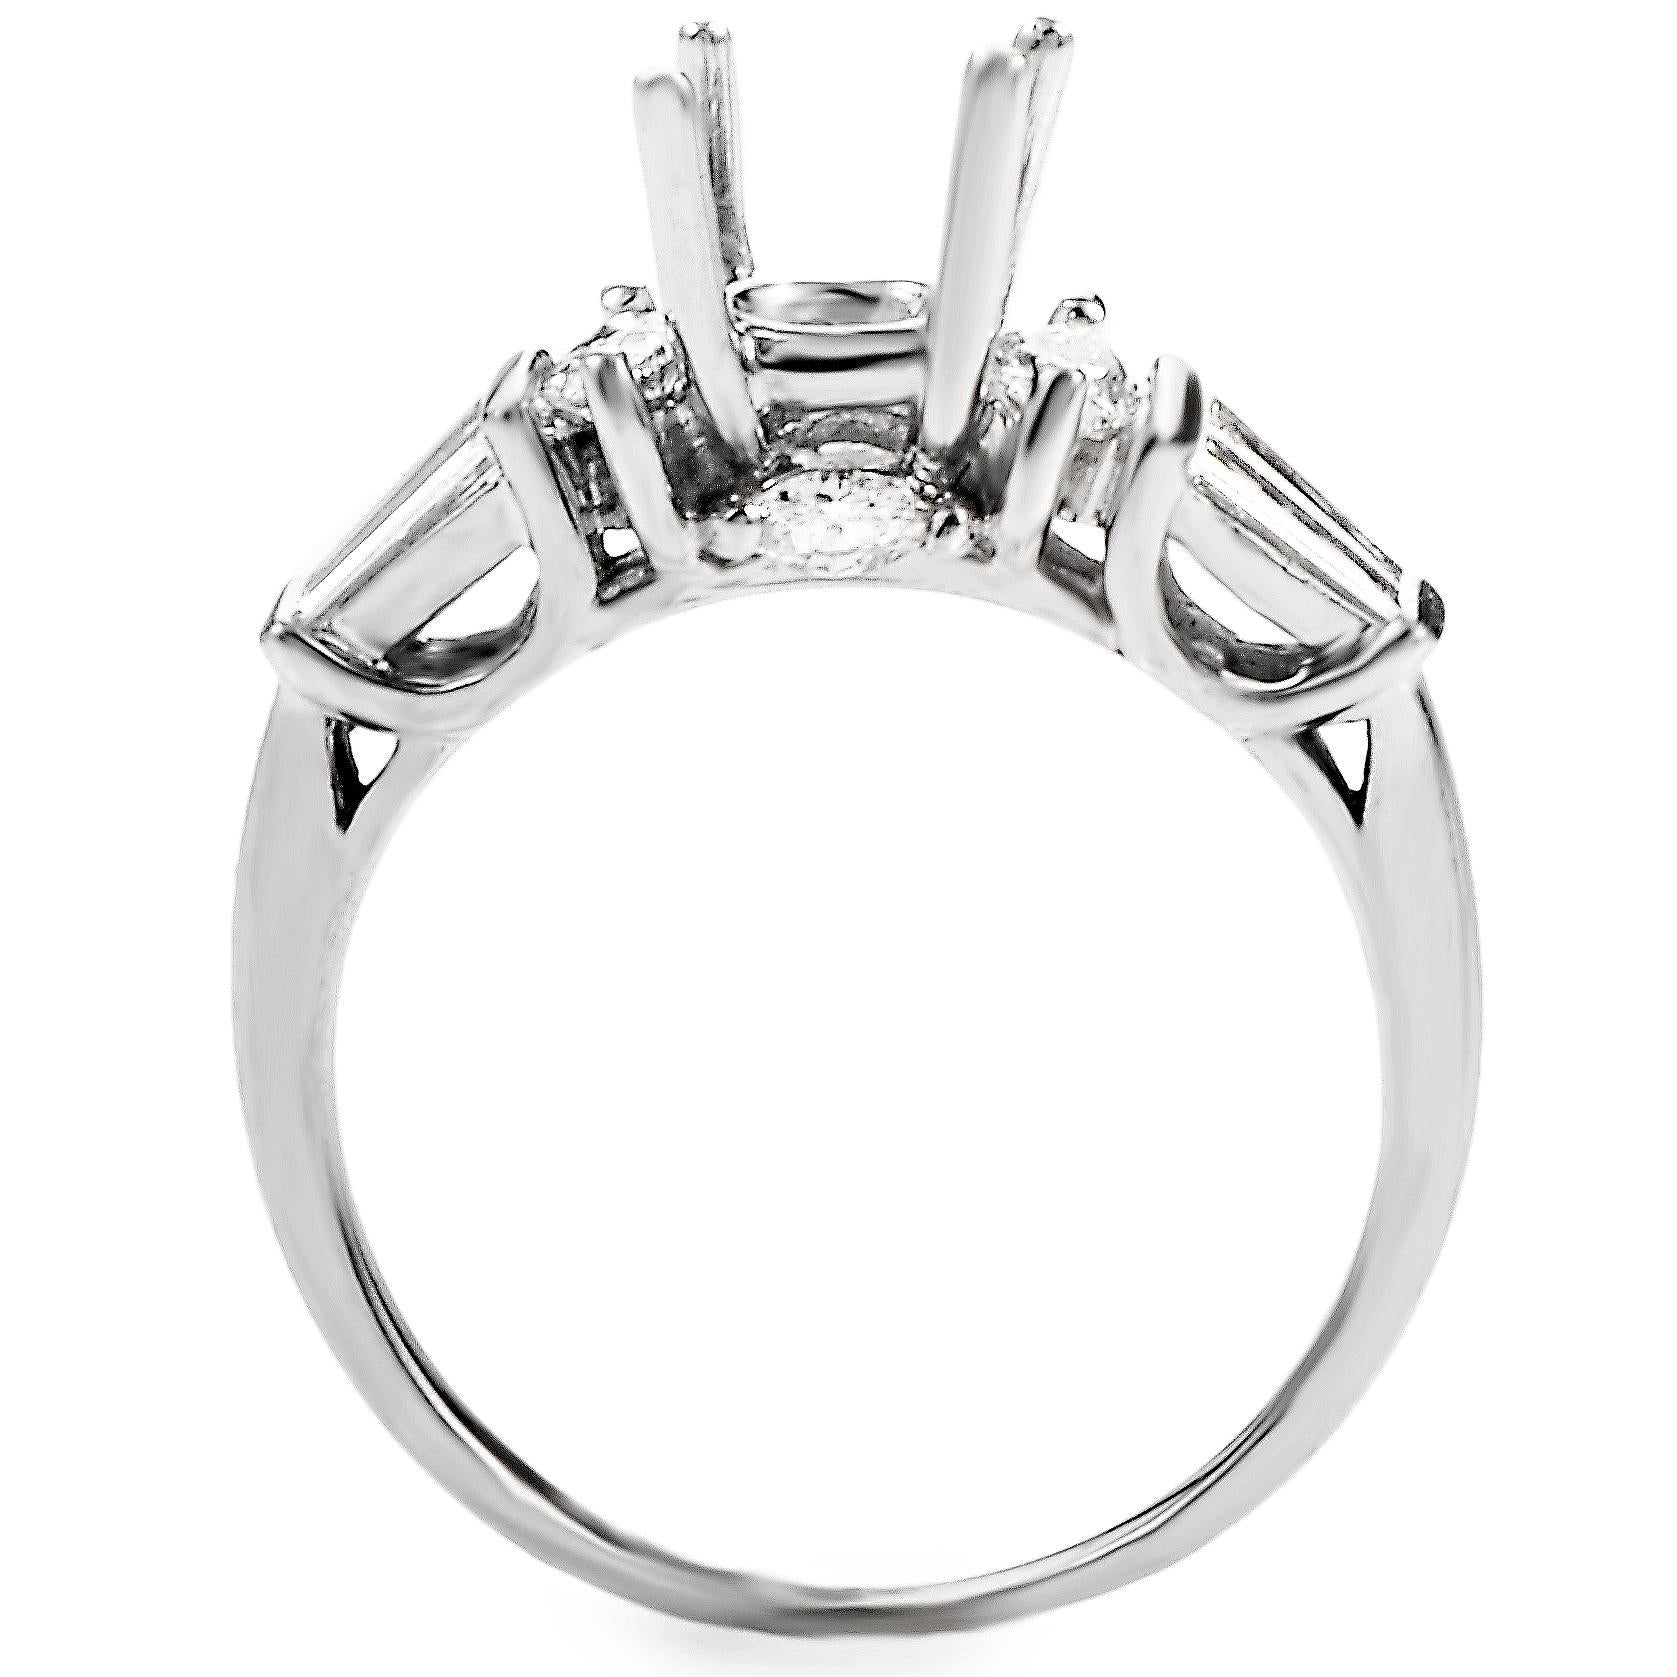 This Natalie K ring is adorable and lovely for any woman. The ring is made of 14K white gold and contains ~.83CT of diamonds.
